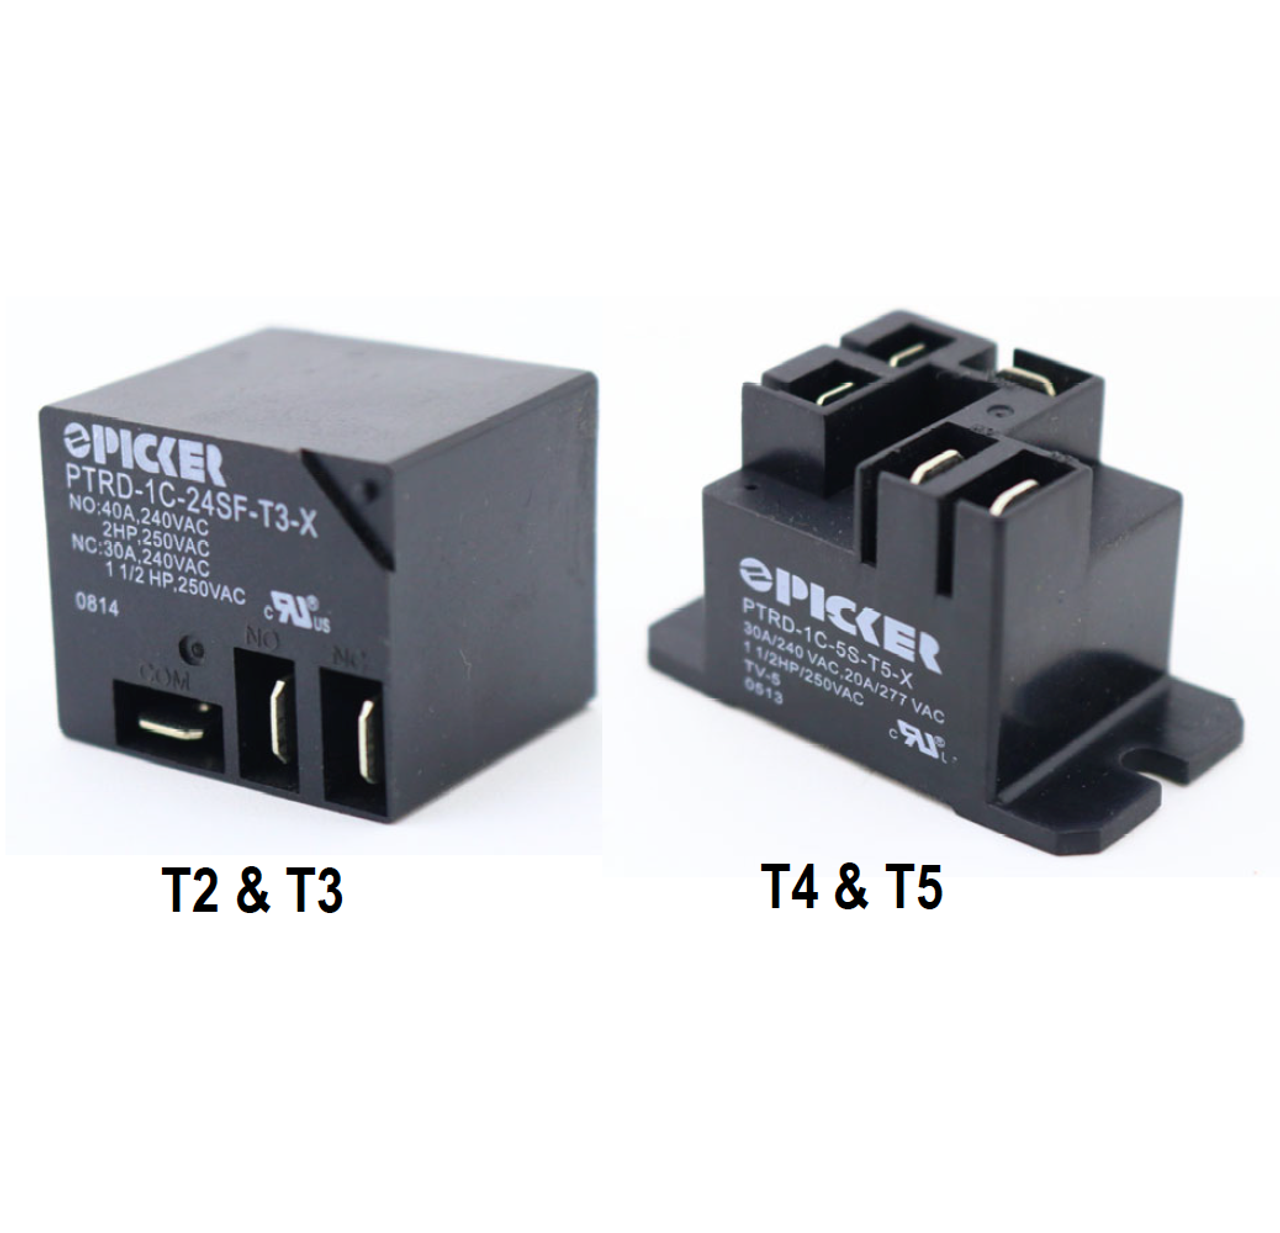 Picker PTRD-1A-48CT-T3-X Power Relays